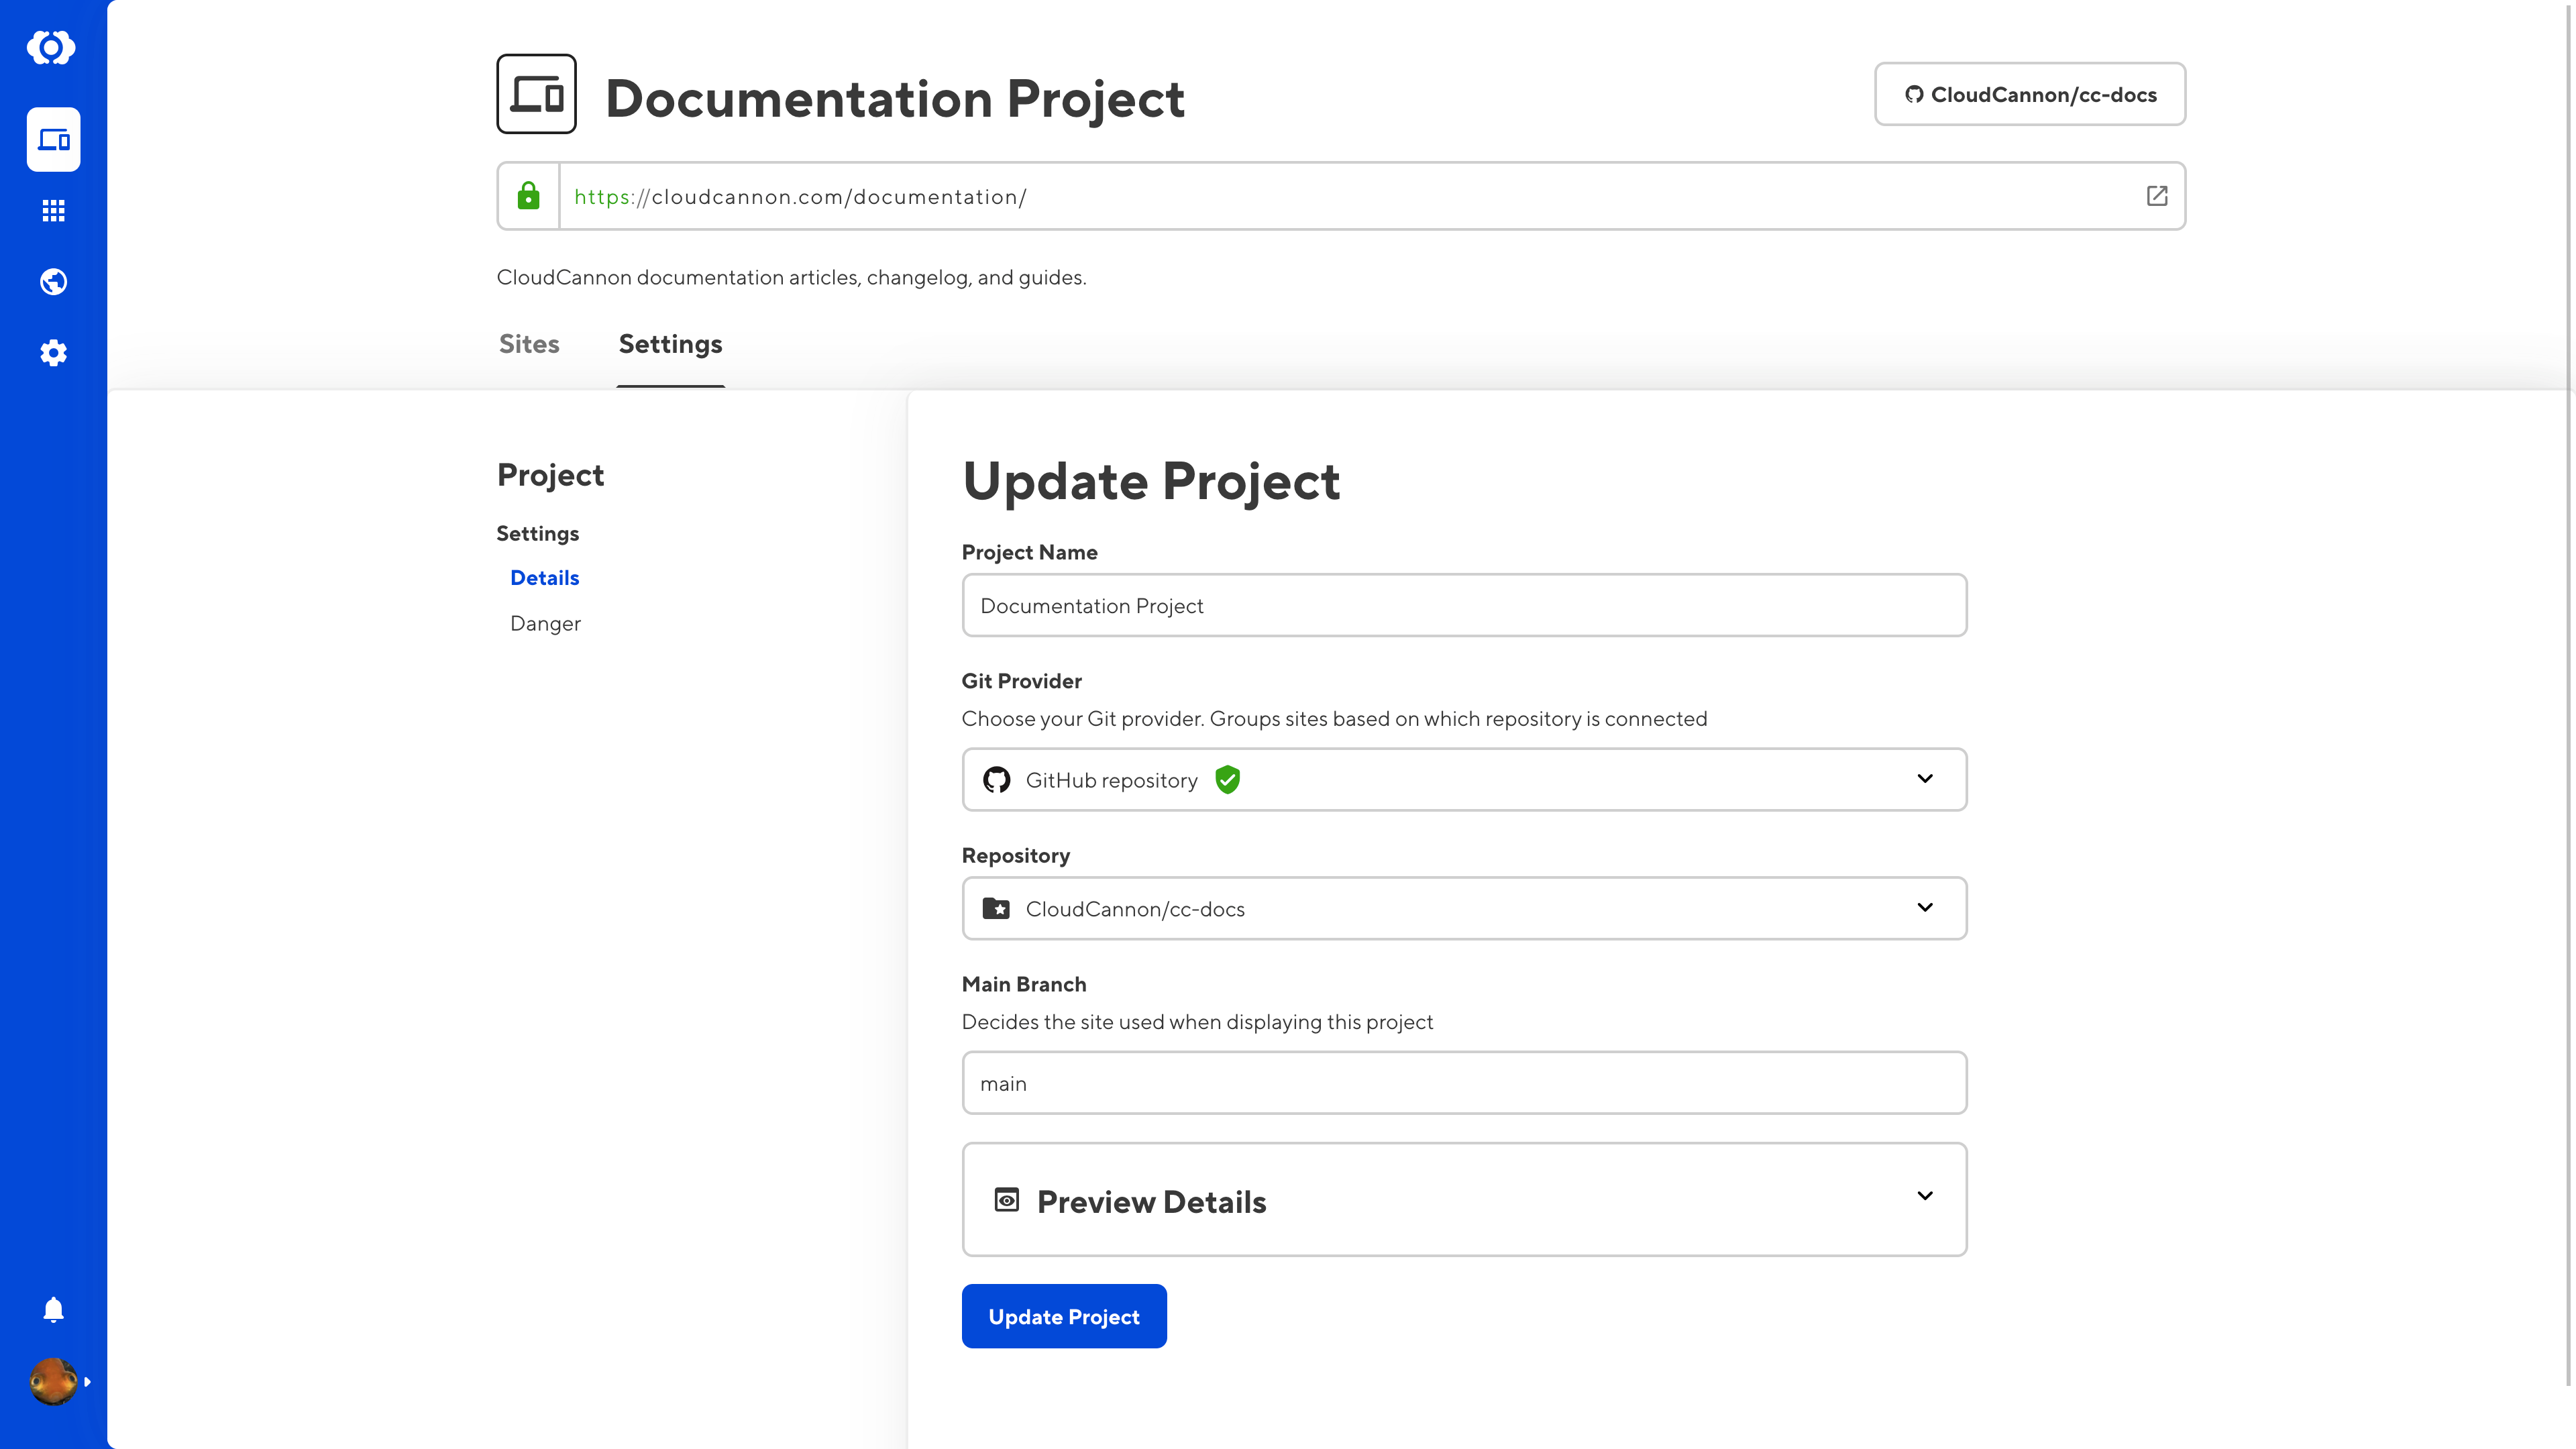 A screenshot of the CloudCannon app shows the Documentation Project page with a list of project details under the Settings tab.